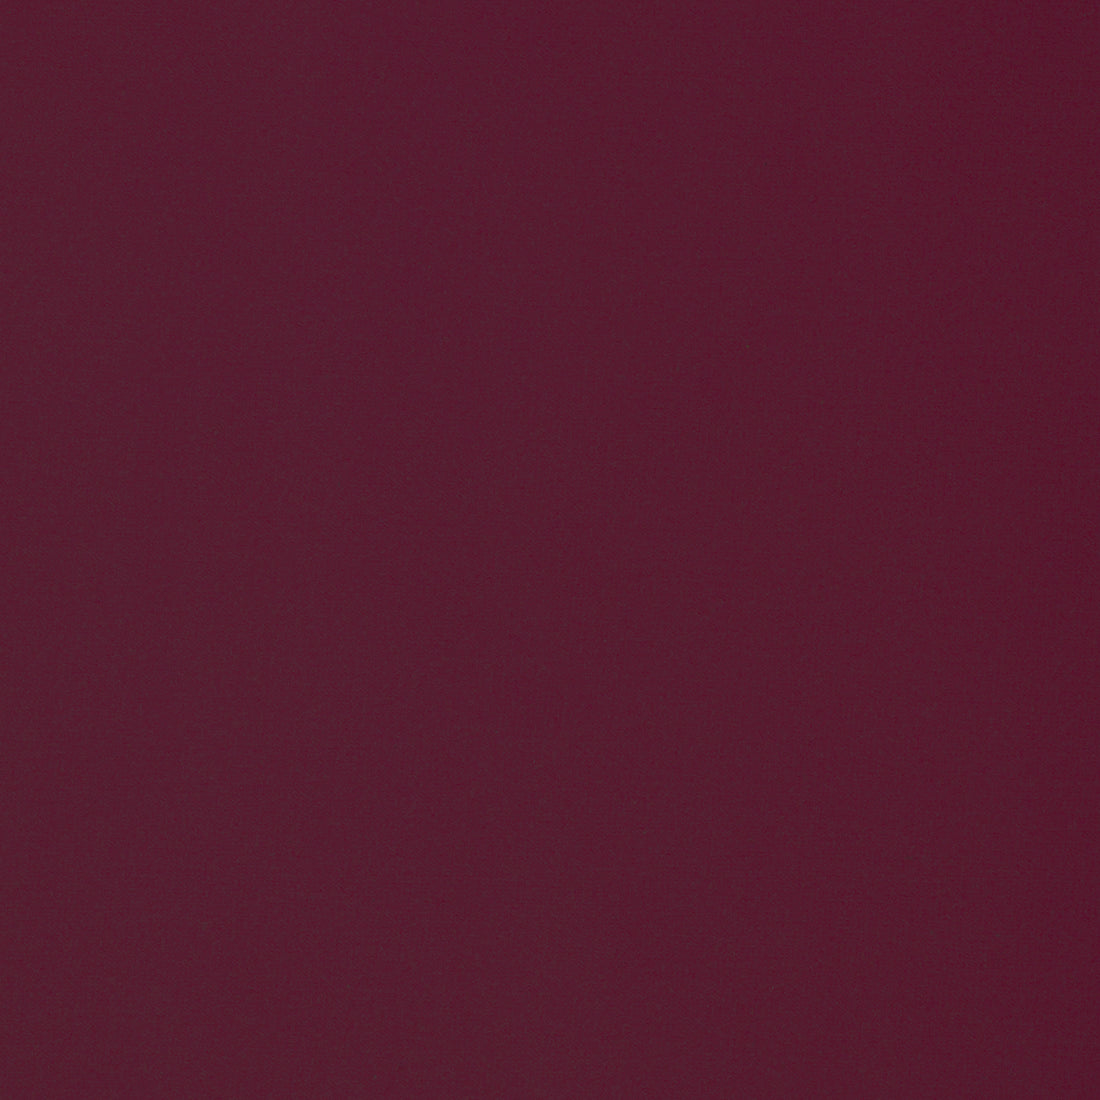 Lyra Velvet fabric in merlot color - pattern number W8900 - by Thibaut in the Lyra Velvets collection